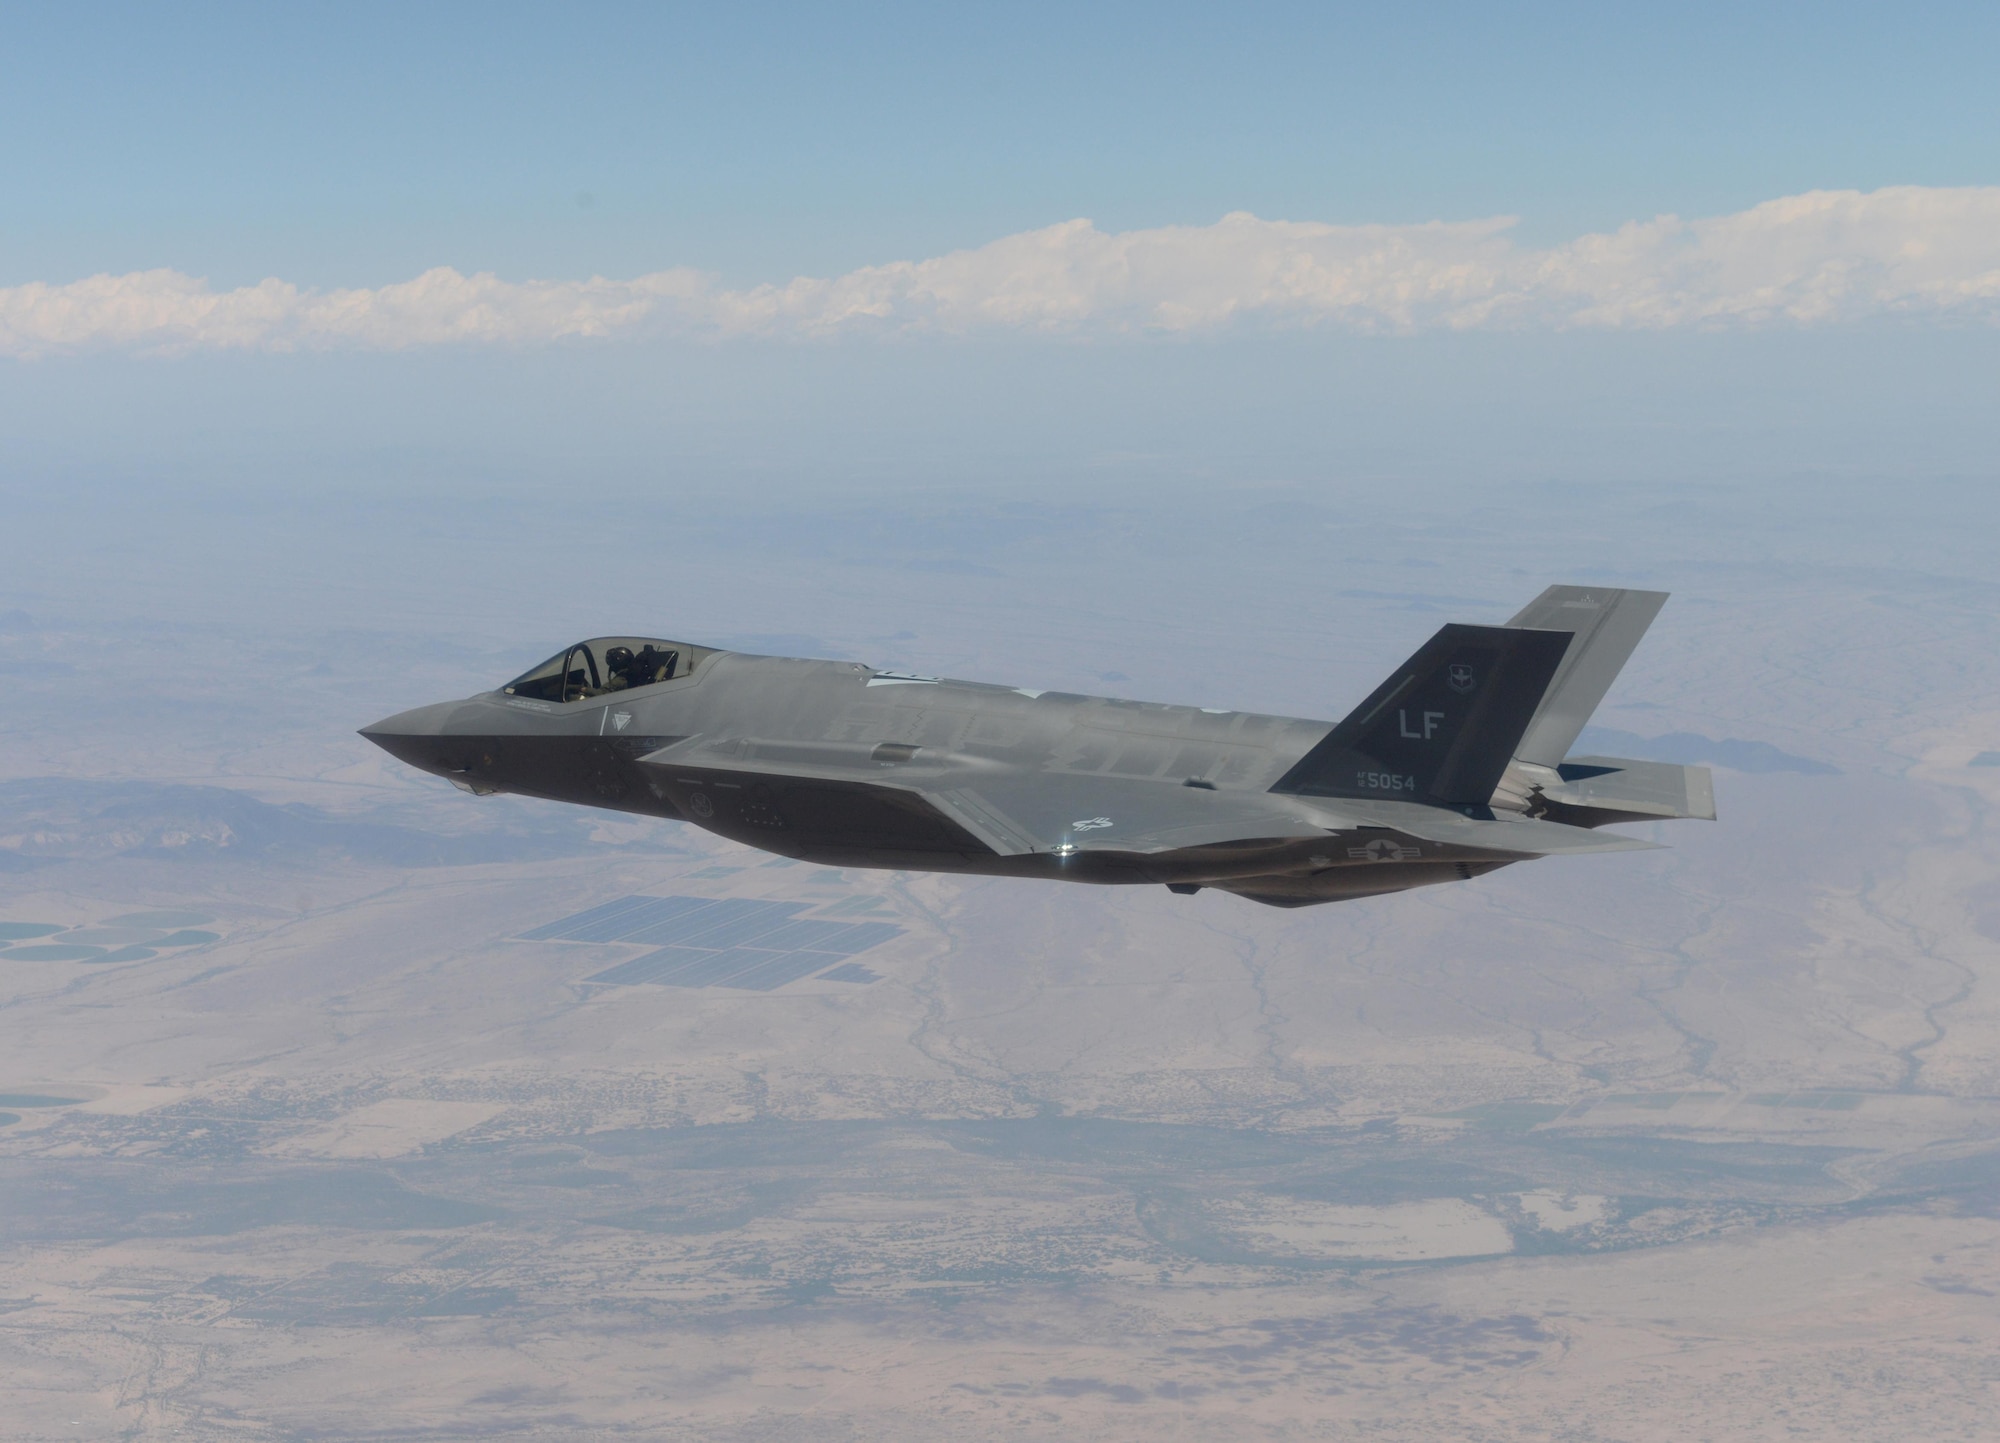 An F-35 Lightning II from the 61st Fighter Squadron lines up into an attack route in preparation to drop a GBU-12 500-pound laser-guided bomb, April 25, 2016, at the Barry M. Goldwater Range in Gila Bend, Ariz. Three F-35s successfully delivered six inert GBU-12s during the practice bombing, making the 61st FS the second squadron at Luke Air Force Base to drop bombs from the F-35. (U.S. Air Force photo by Airman 1st Class Ridge Shan)